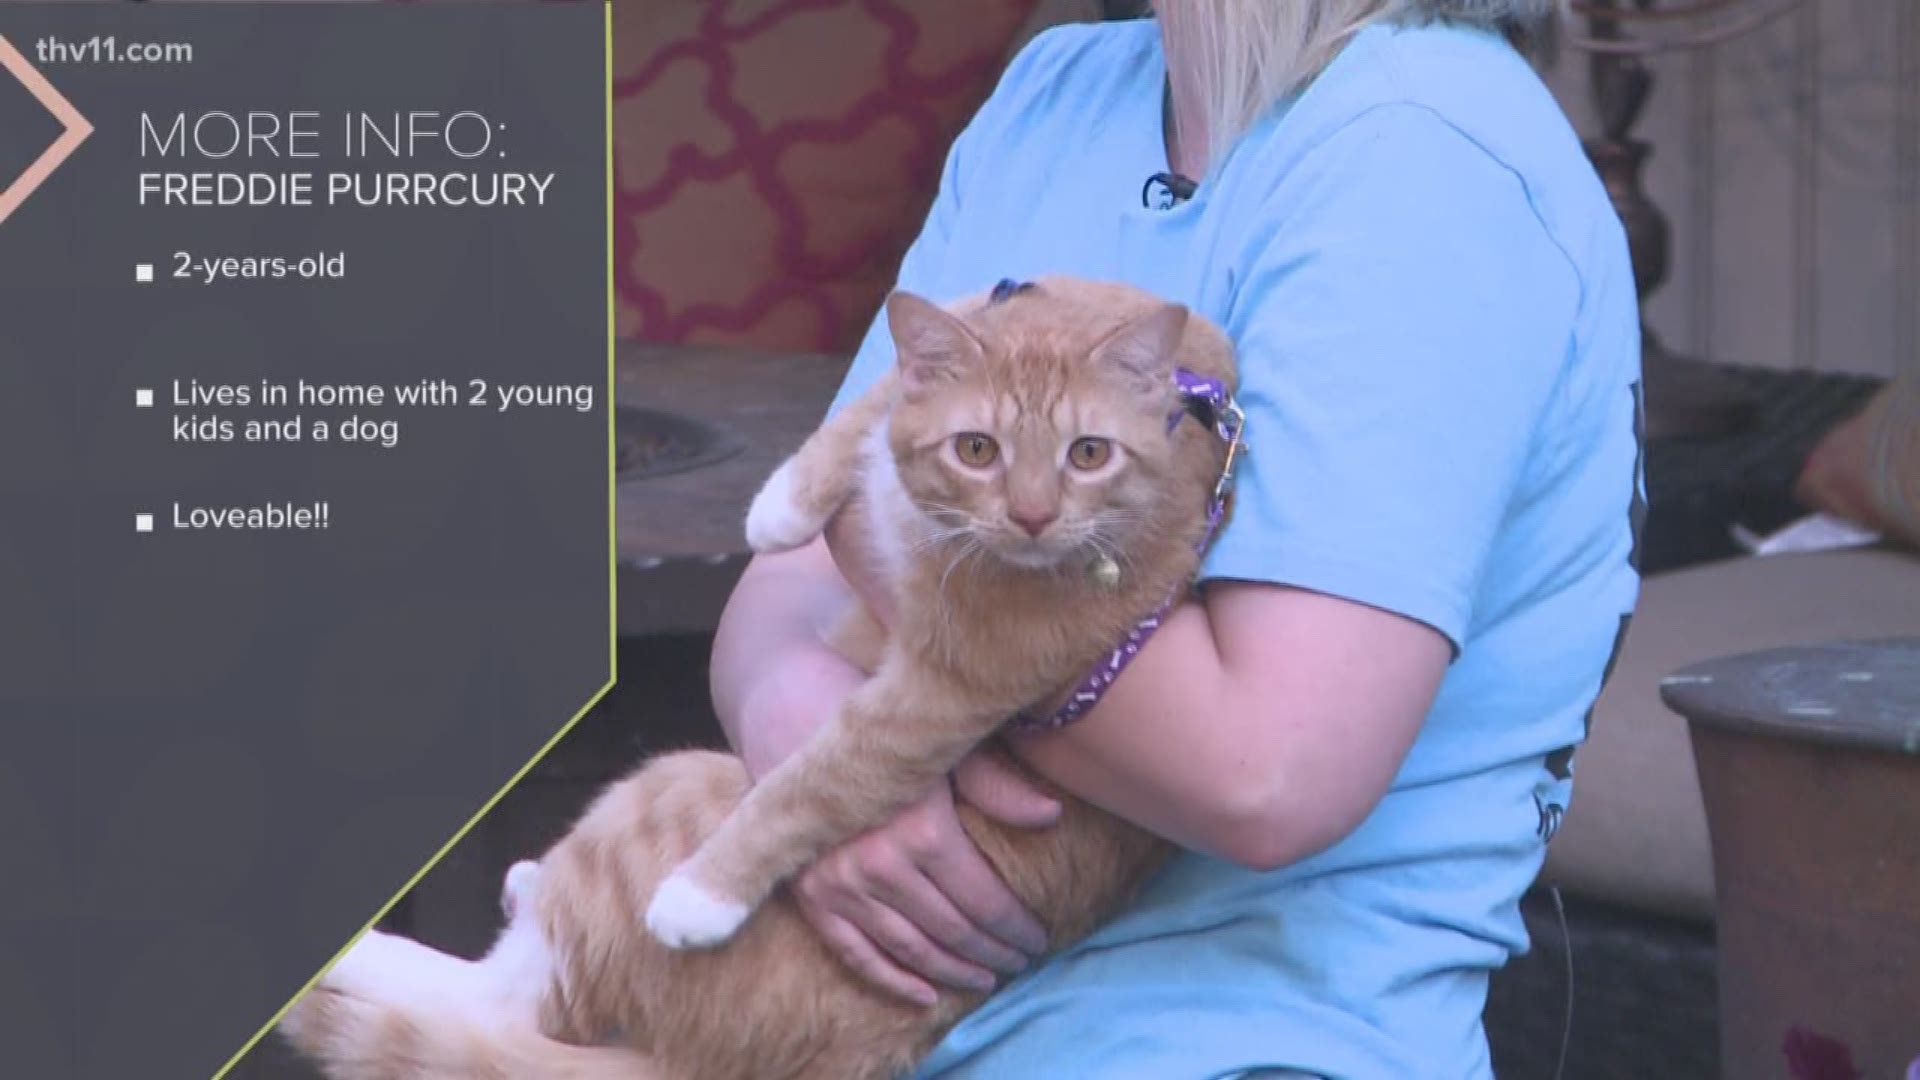 Rock City Rescue has a 2-year-old male cat that is up for adoption in Central Arkansas. Email rockcityrescue@gmail.com for more information.